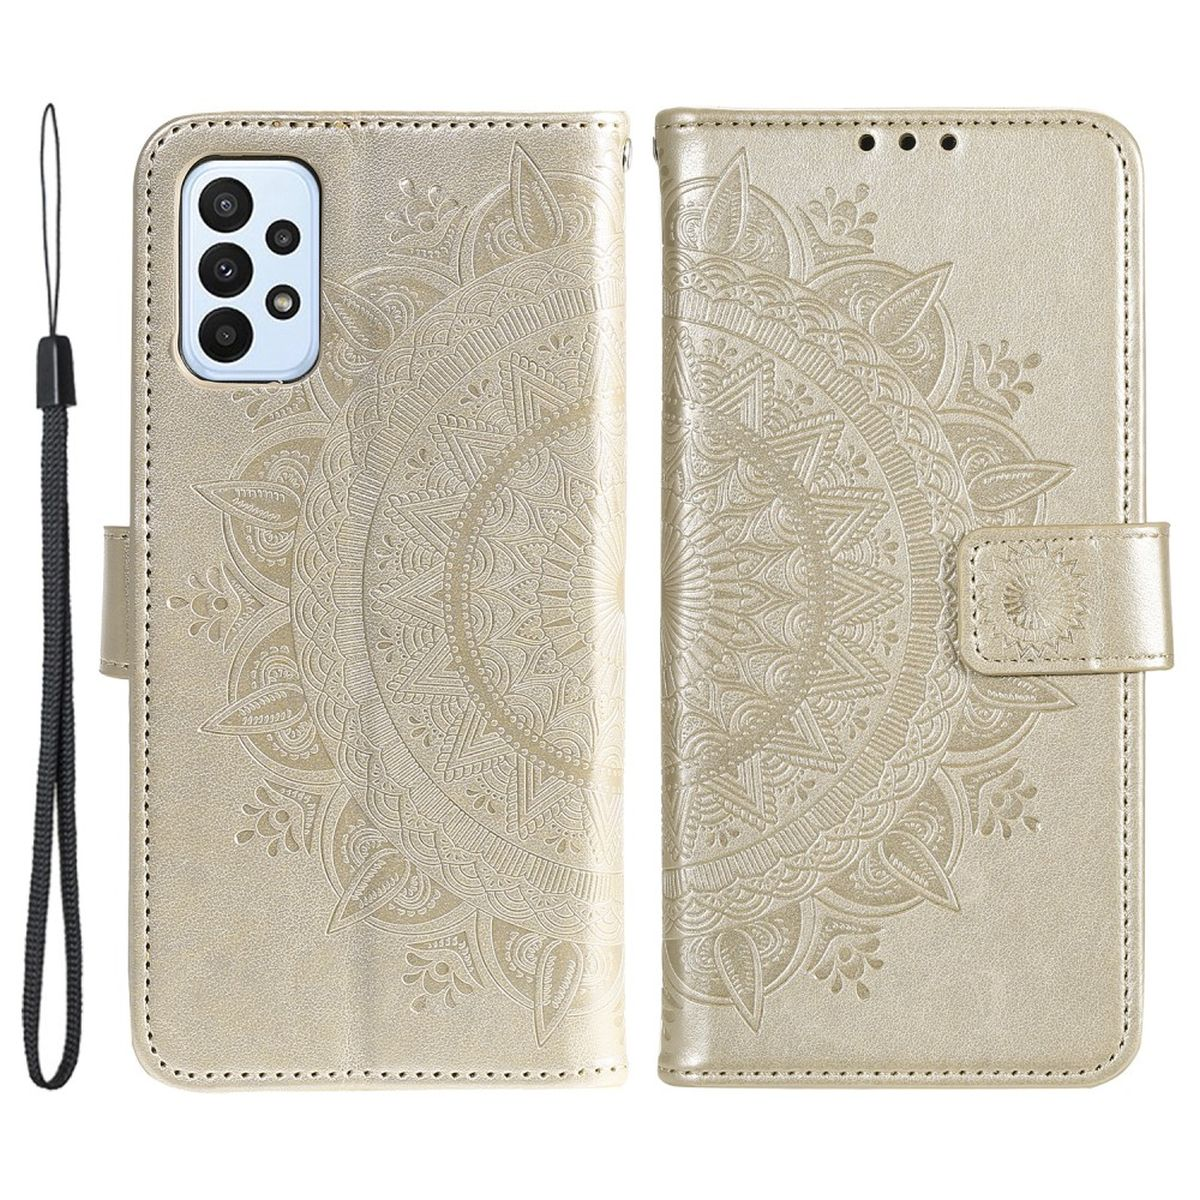 A23, Galaxy Gold Klapphülle Bookcover, COVERKINGZ Samsung, Muster, mit Mandala